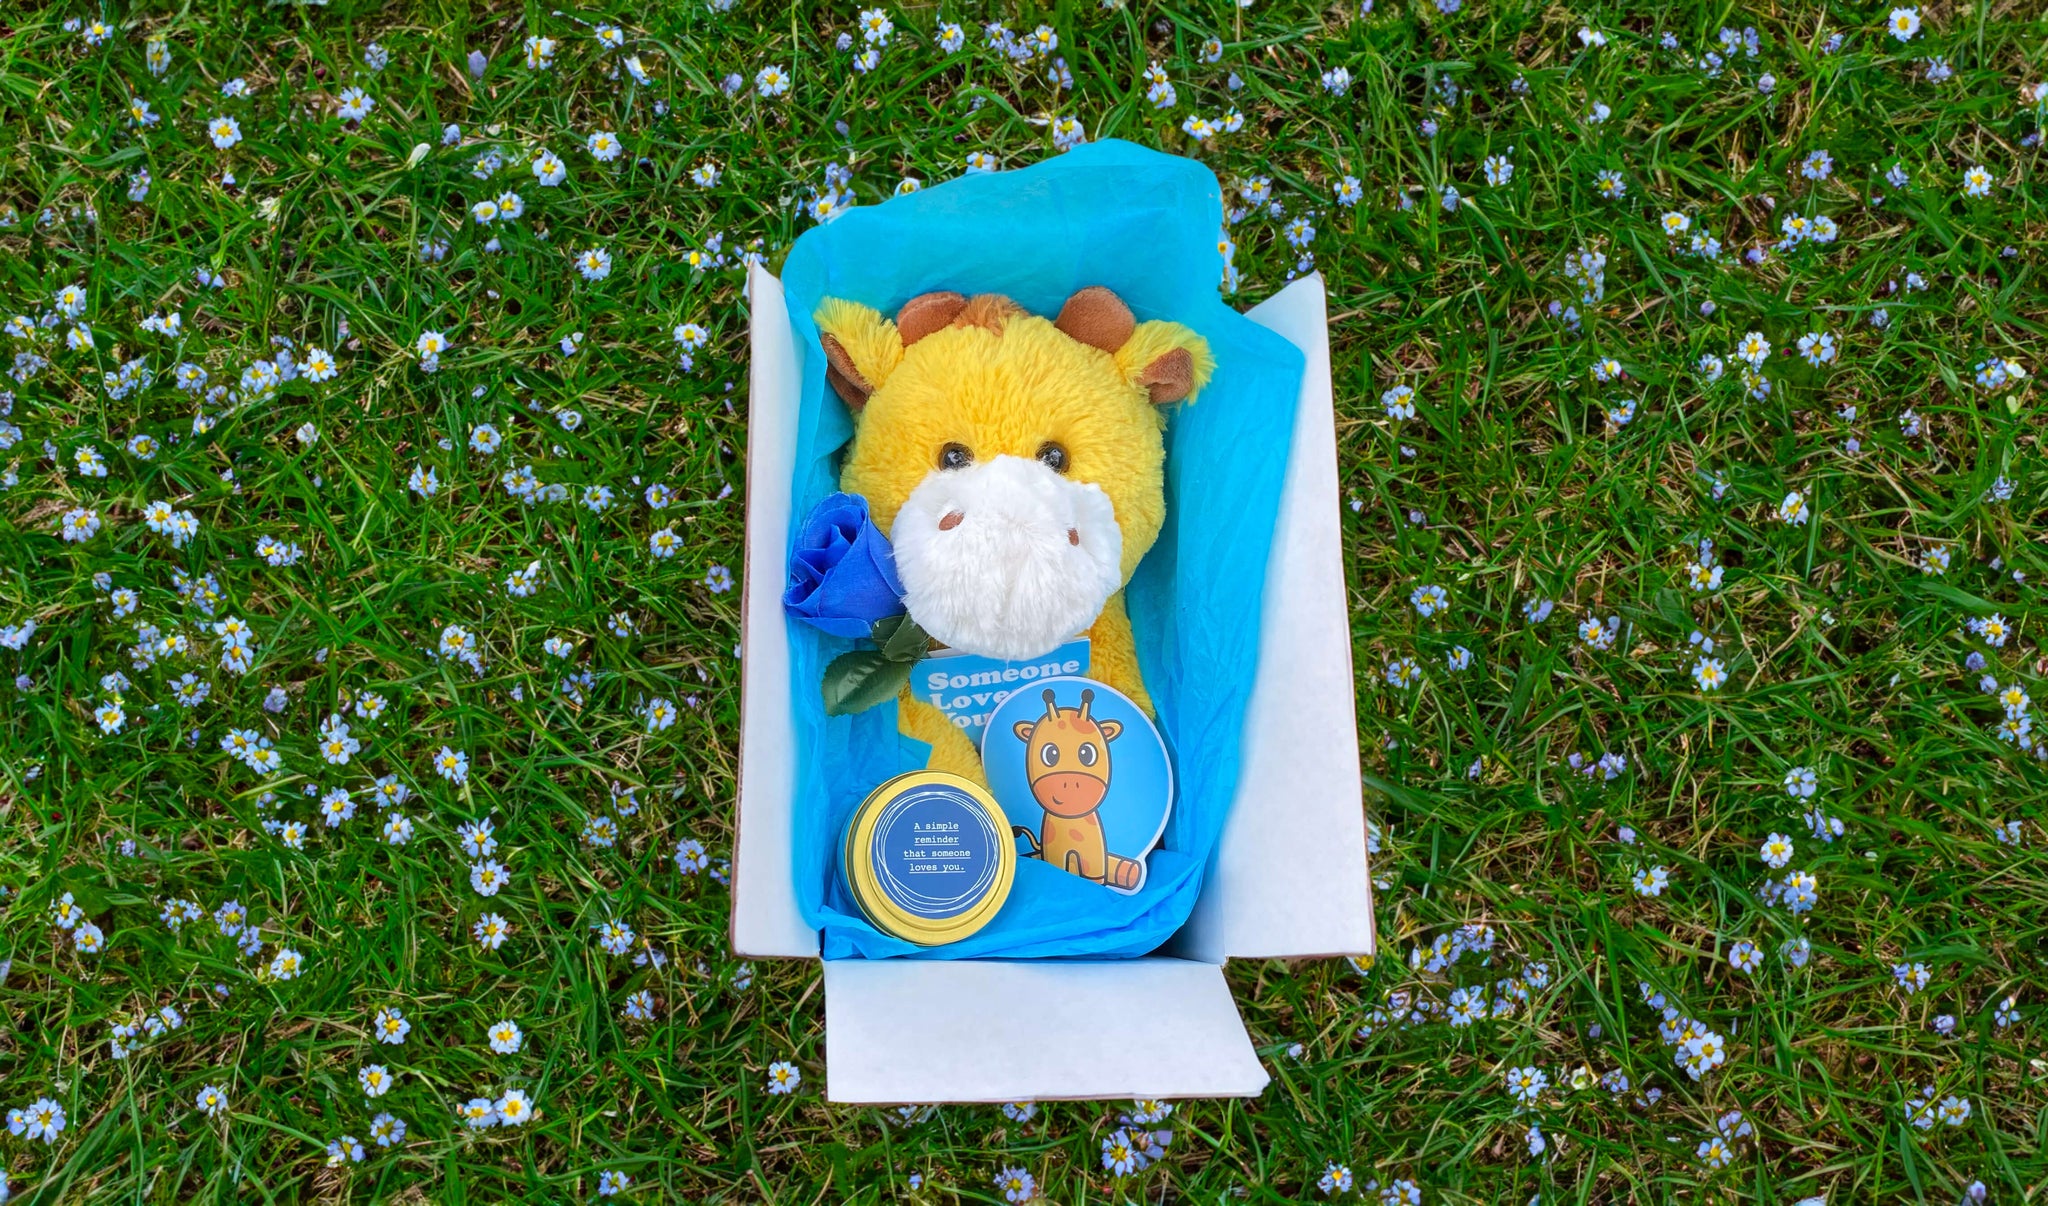 An image of George the Giraffe packaged sitting in the grass and white clover. Inside the package with George the Giraffe is the Amber Sky Candle, an artificial blue rose, and a George the Giraffe sticker